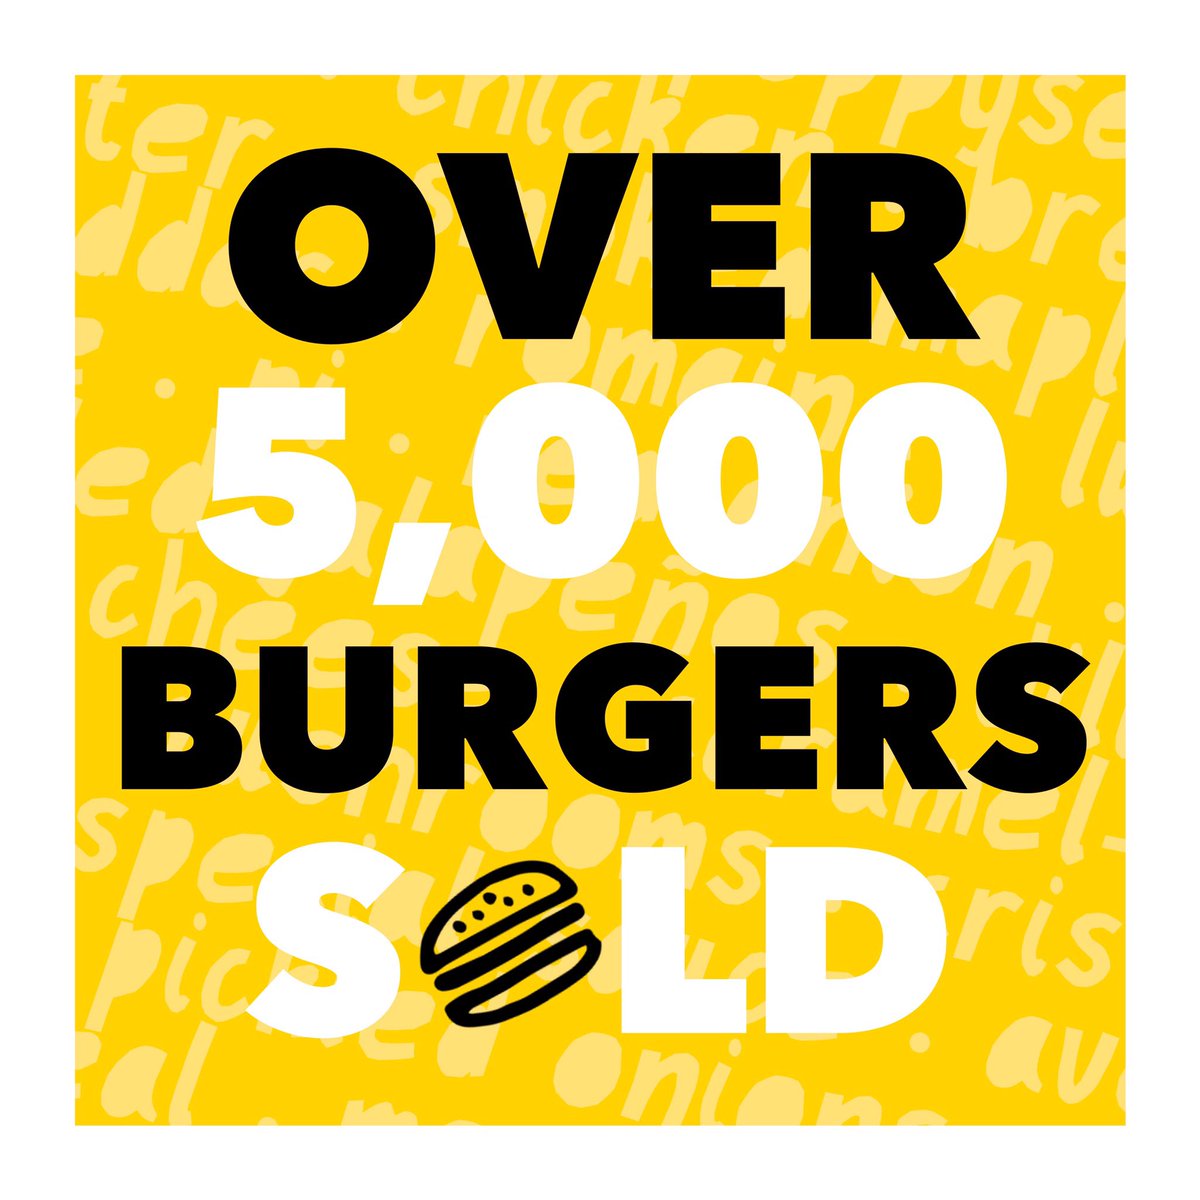 We'd like to thank all of the fantastic restaurants that participated, as well as our AMAZING community for coming out and buying the tastiest burgers Hamilton, Burlington, and Winona has seen yet! 🍔✨👑

#HamOnt #BurlOn #Winona #novemburger #HamOnteats